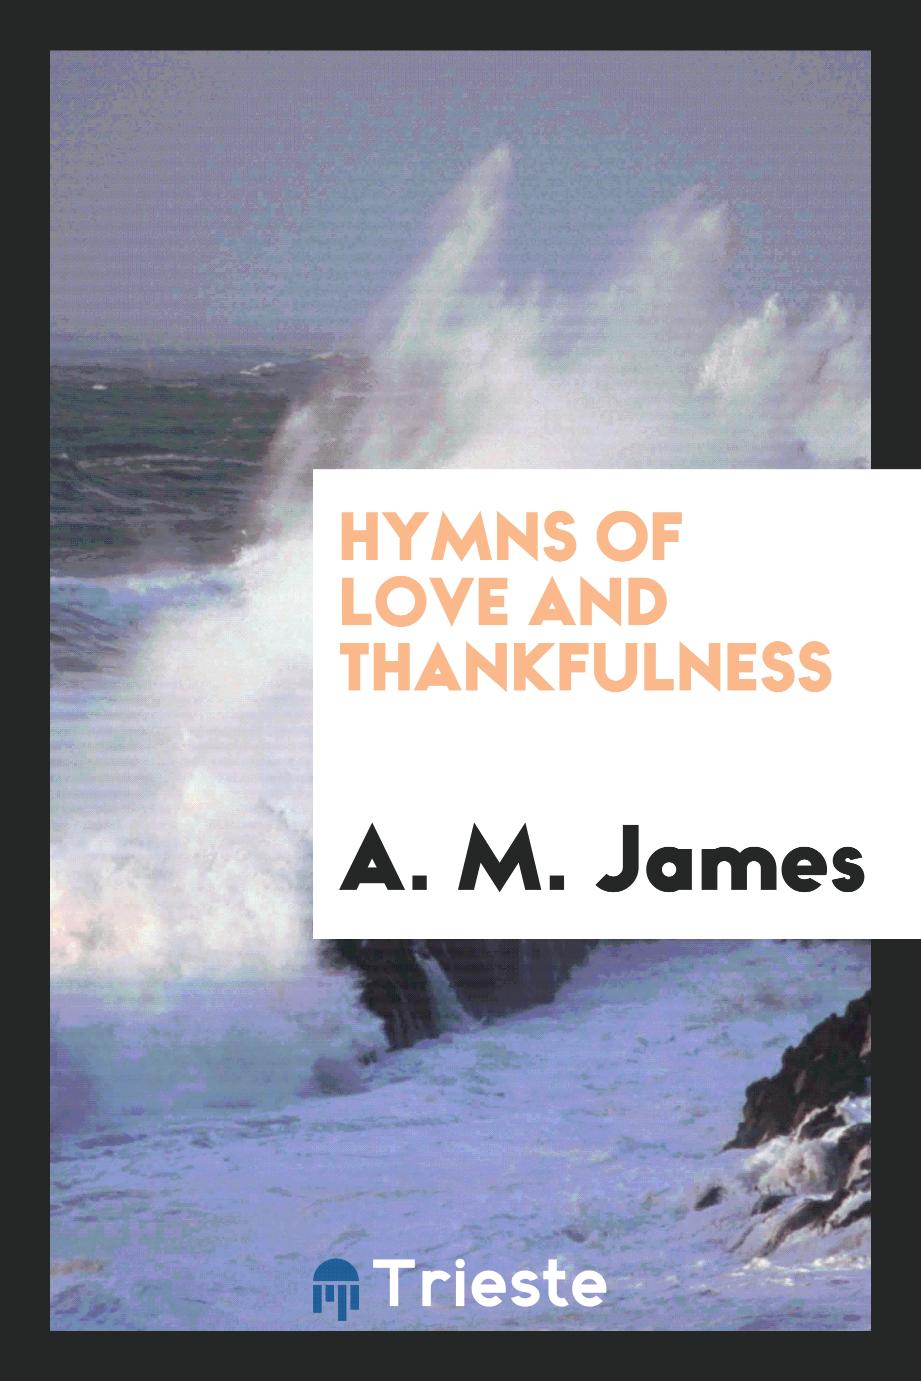 Hymns of love and thankfulness